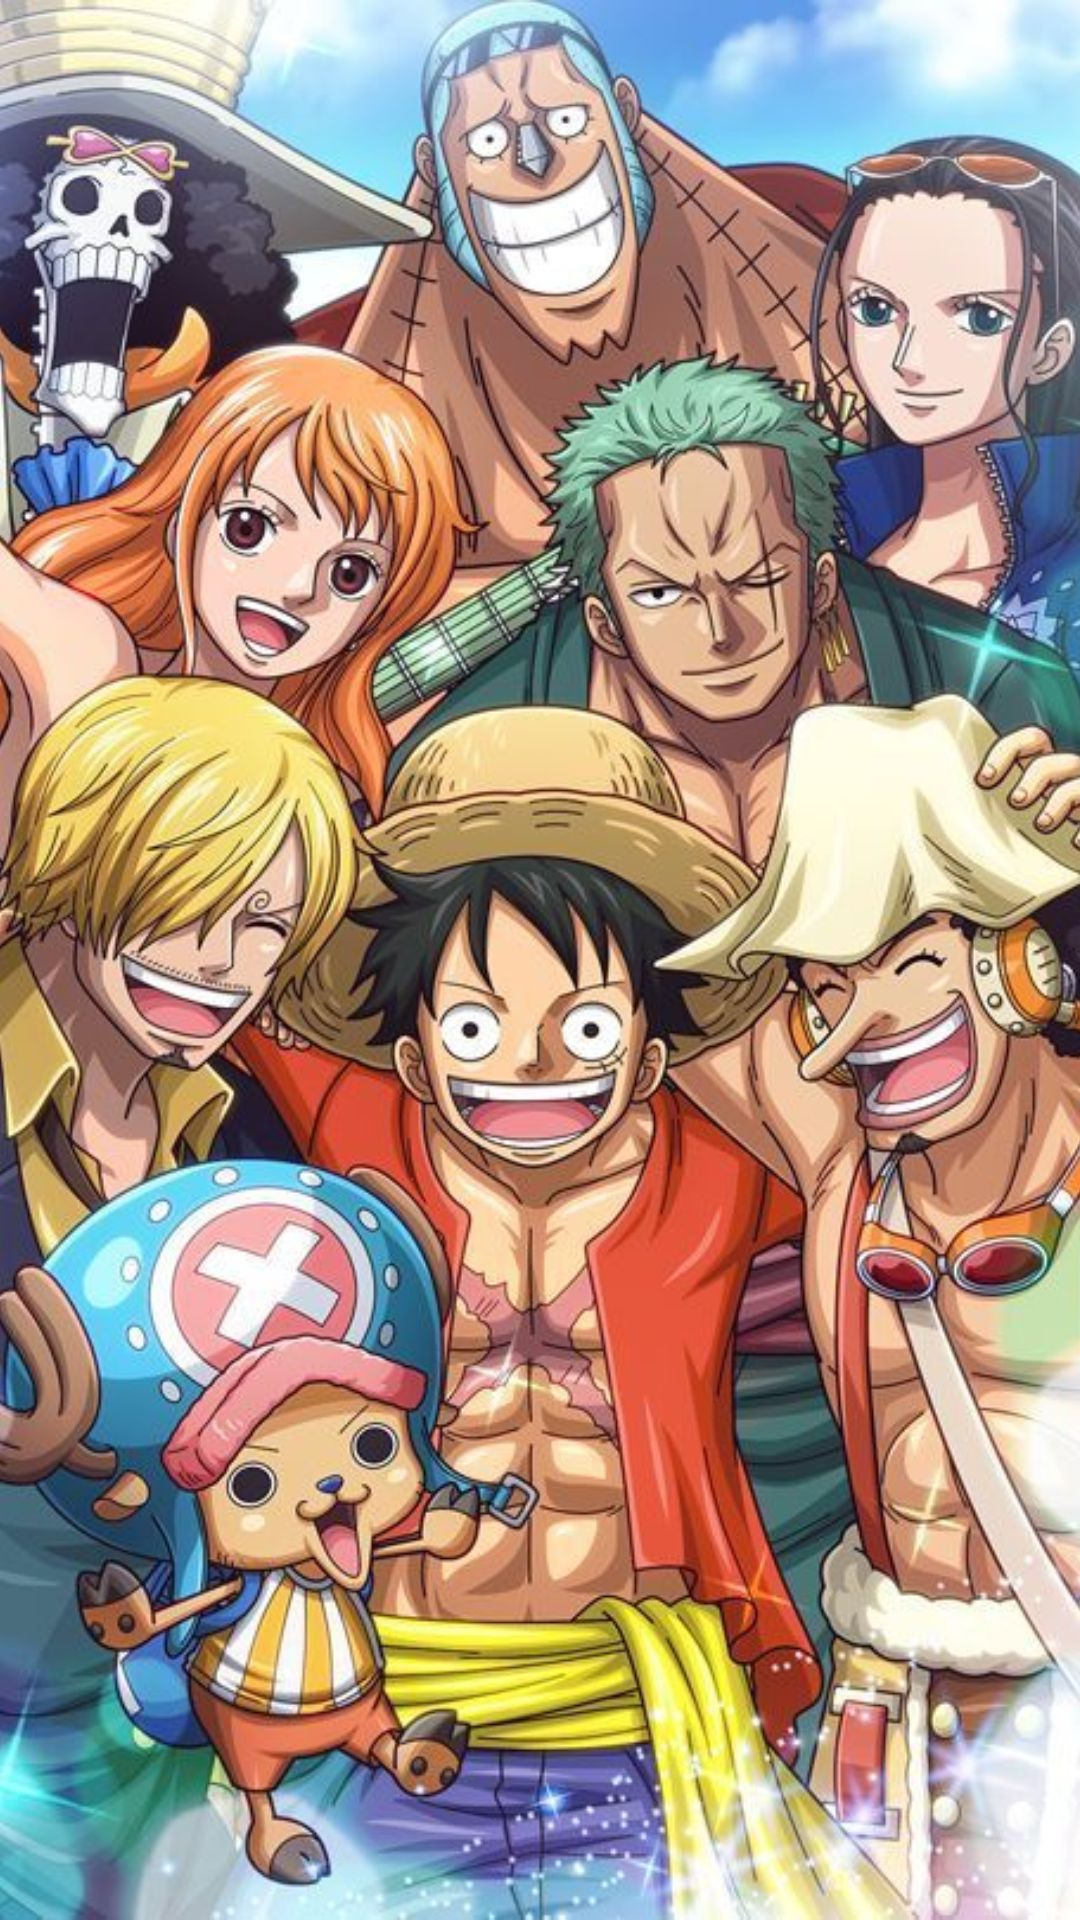 1080x1920 One Piece HD Wallpapers Top Ultra HD One Piece Backgrounds Download